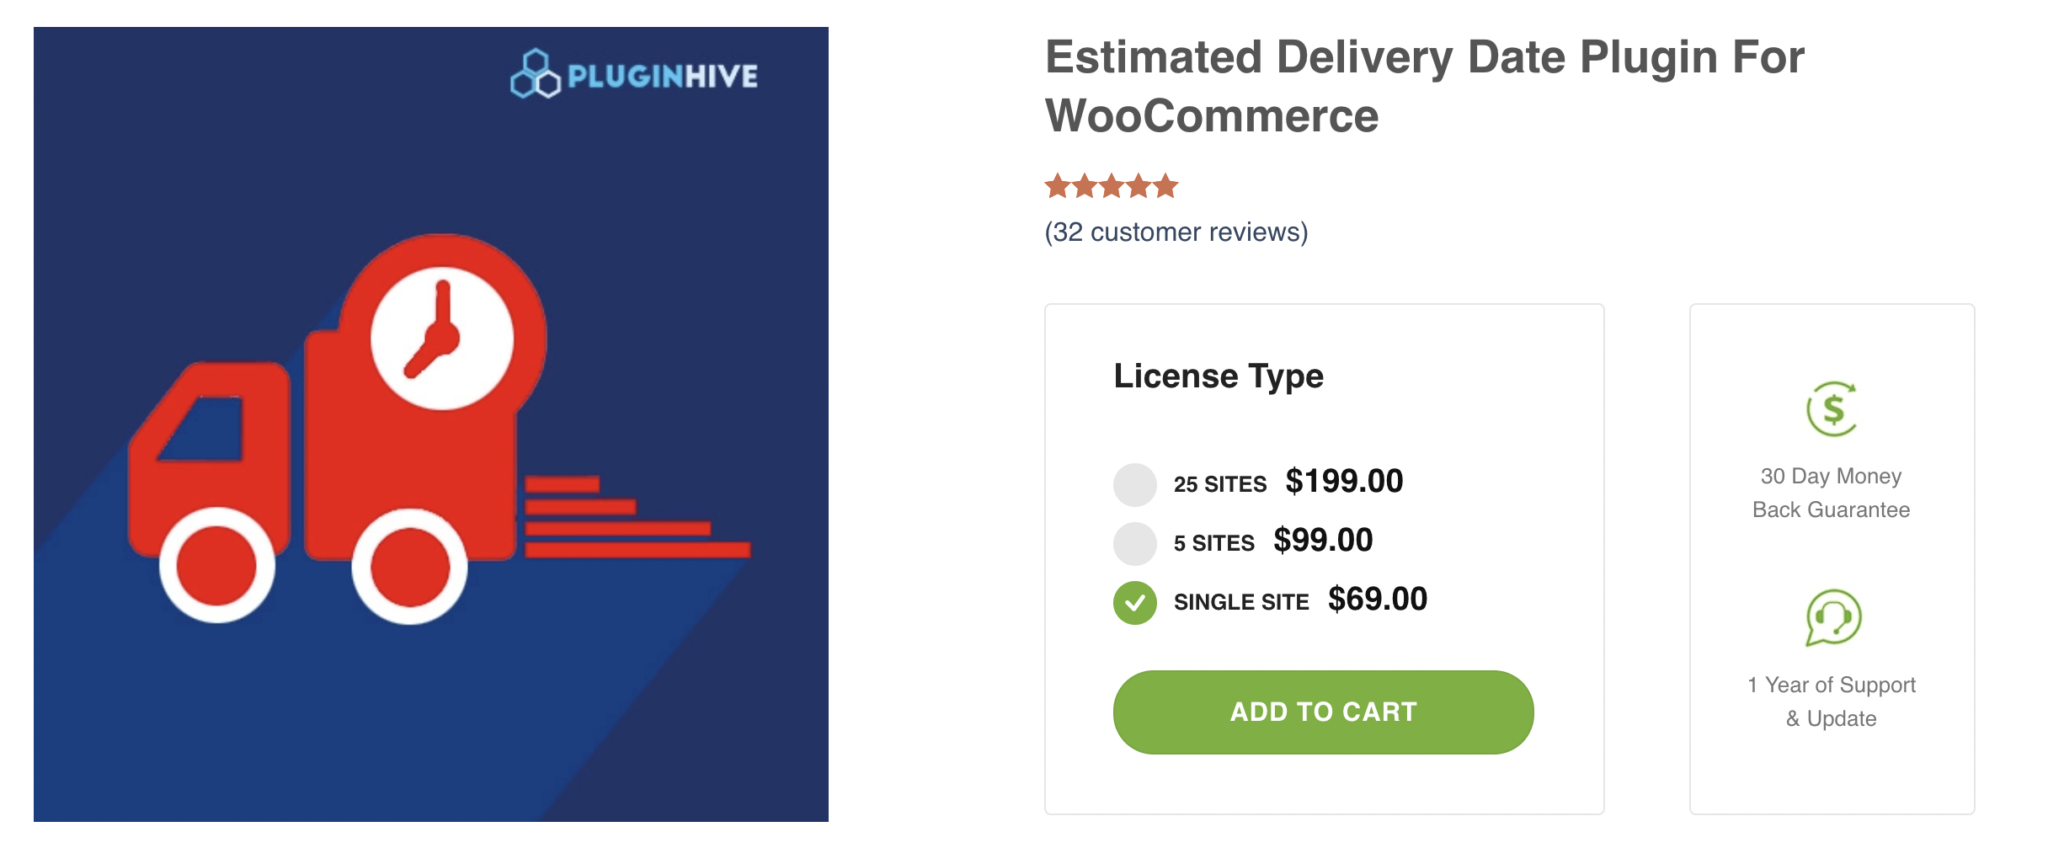 13 Best Order Delivery Date Plugins for Your